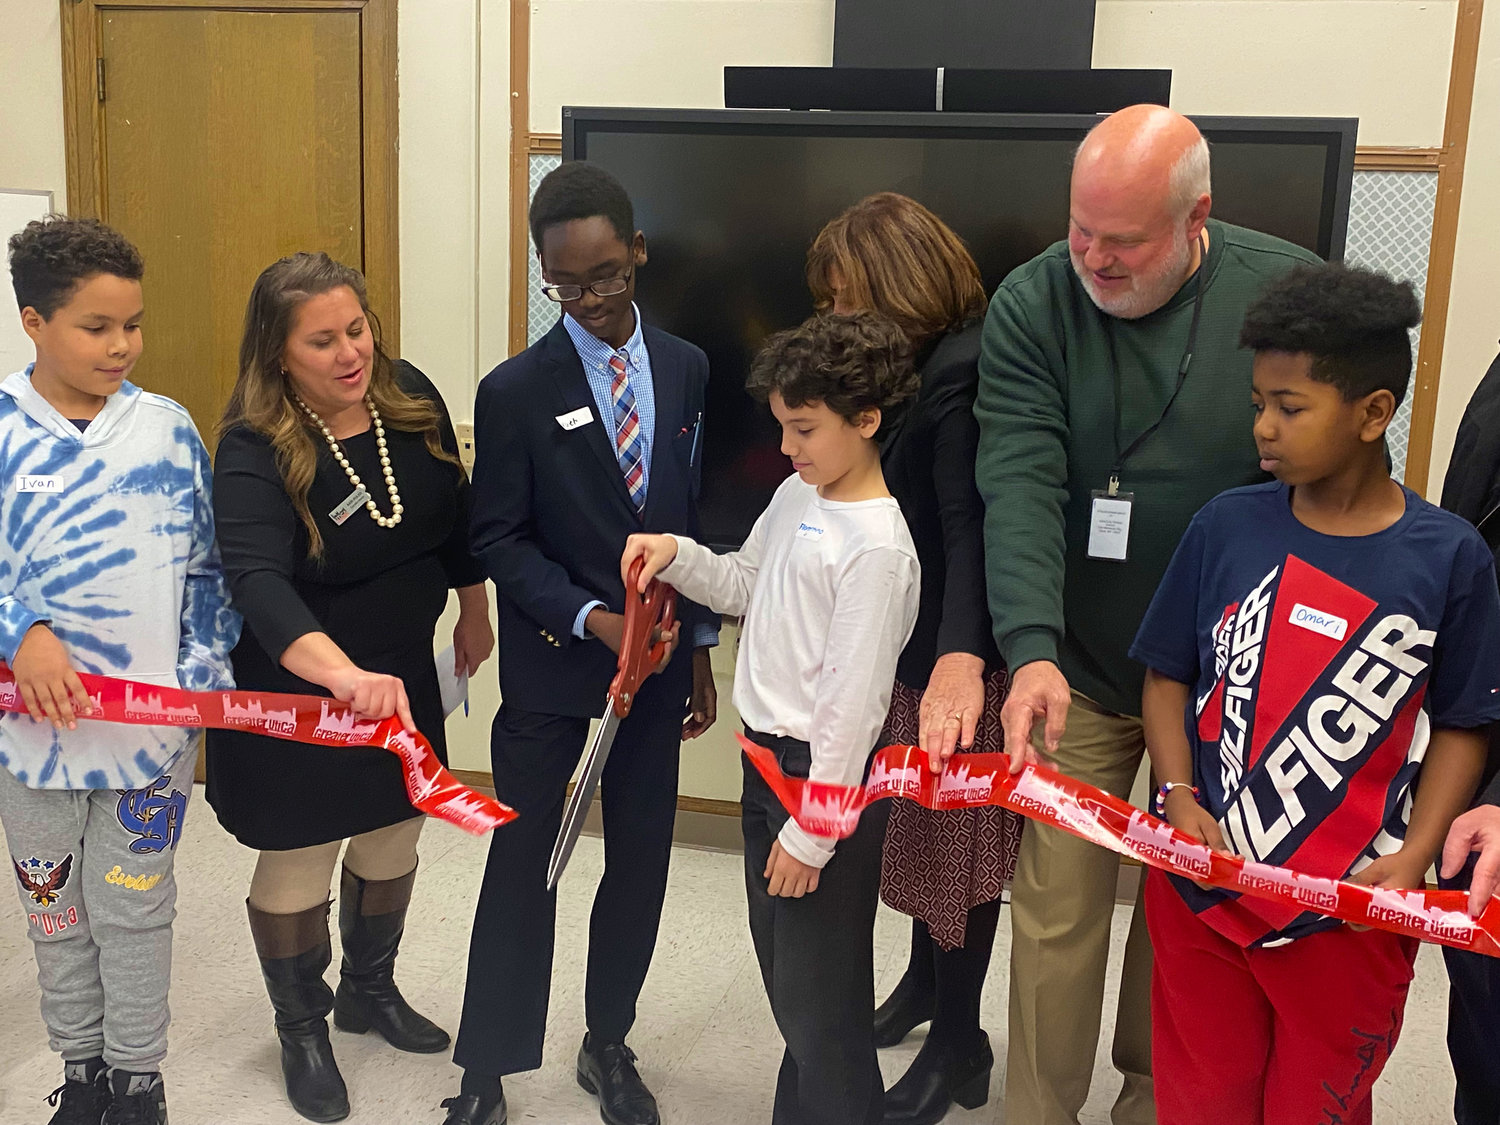 Students at Kernan Elementary School were joined by the Greater Utica Chamber of Commerce and local officials to celebrate the grand opening of the school’s student-led food pantry initiative.